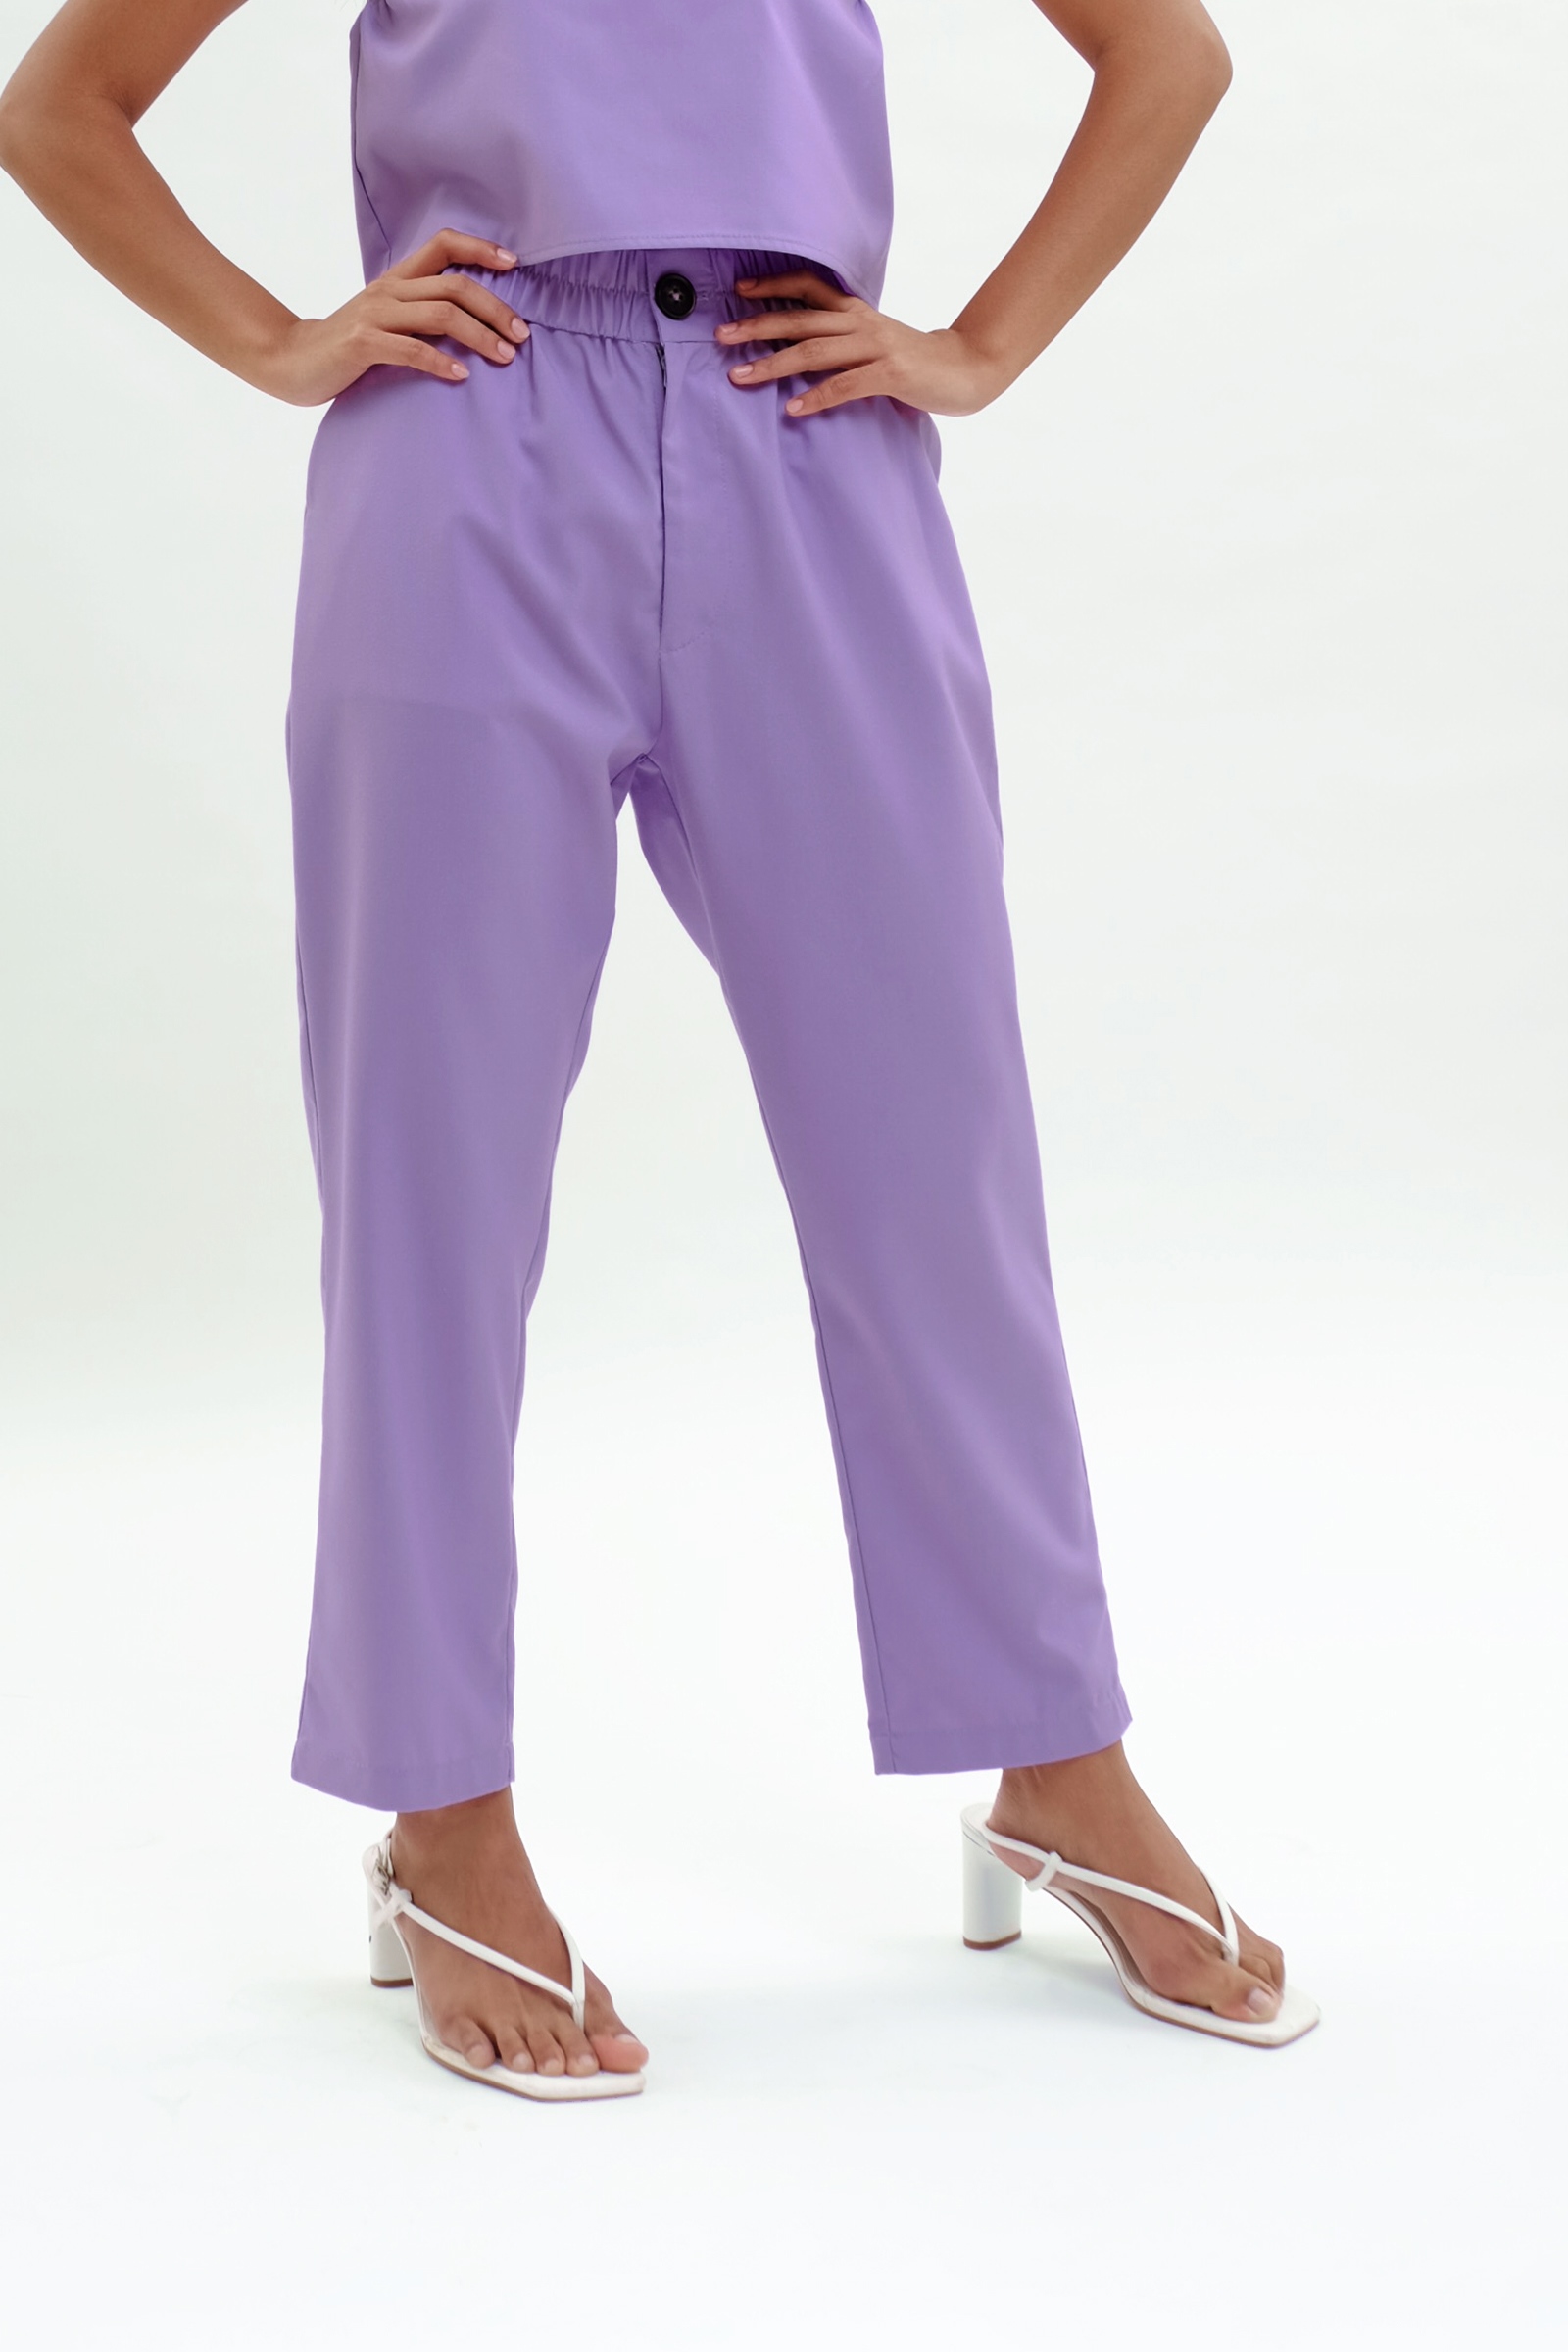 Picture of Emery Pants Sheer Lilac